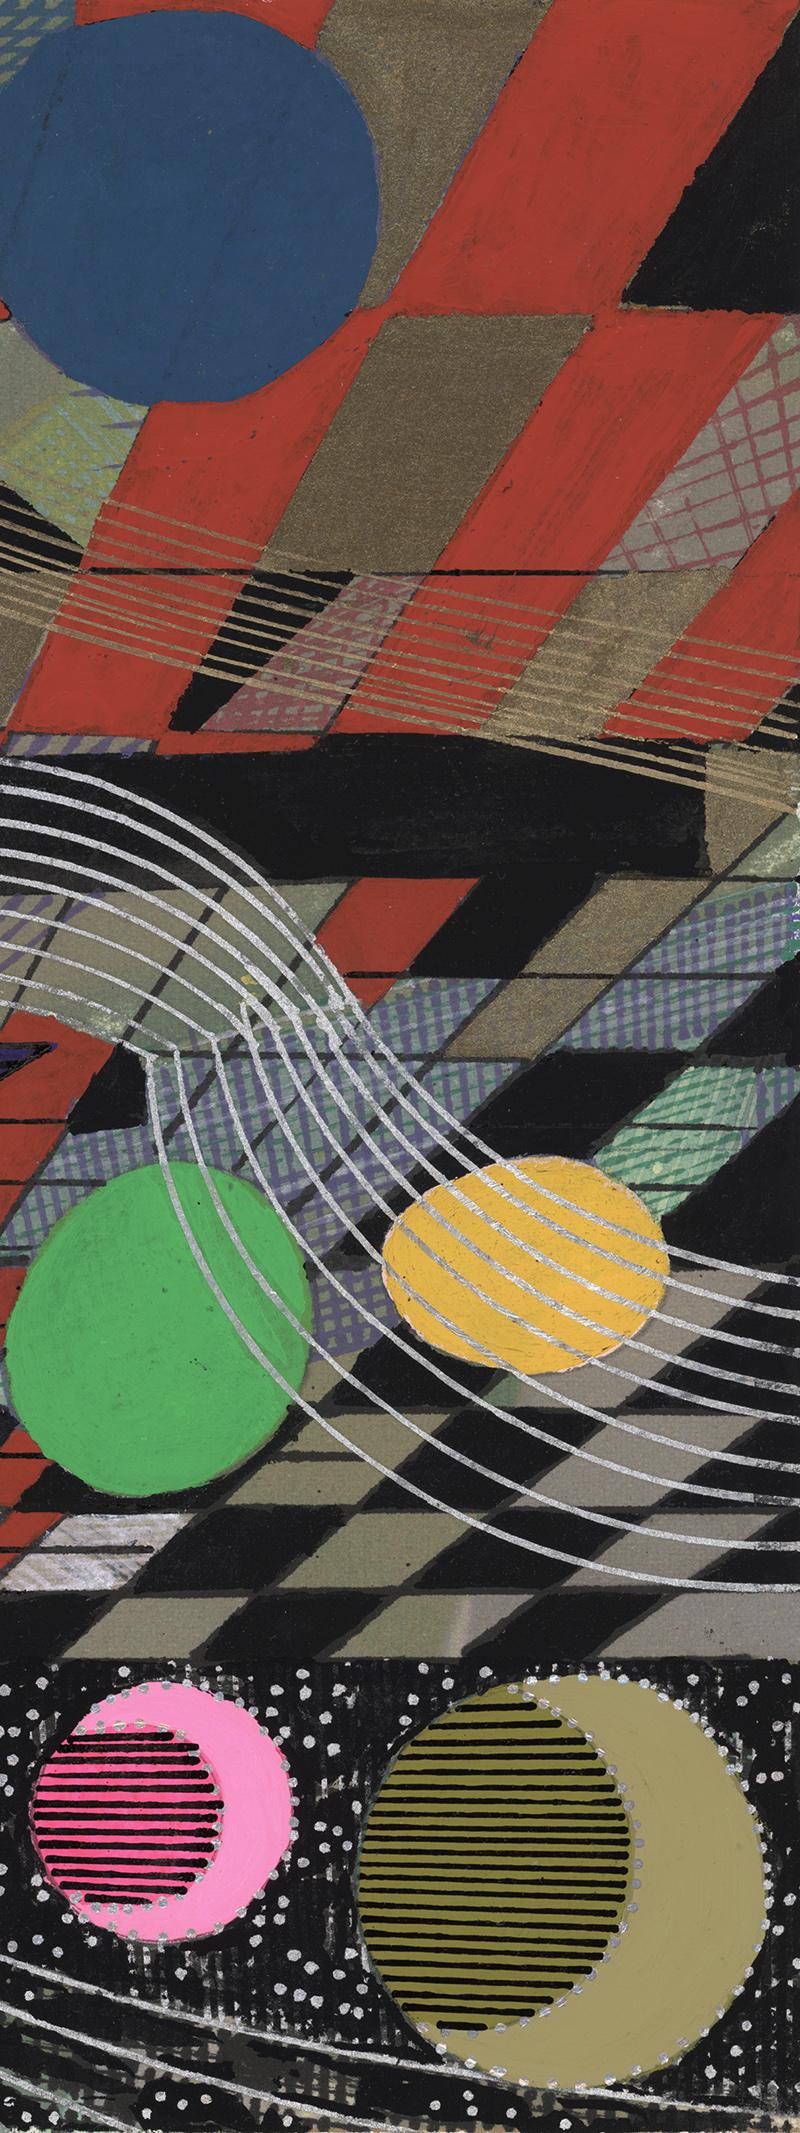 This colored painted drawing imagines space in the multiverse: looping arcs of space contrasted to the 3-D space familiar to us represented by a checkerboard with a vanishing point, and a line-up of waxing and waning planets. The image measures 9